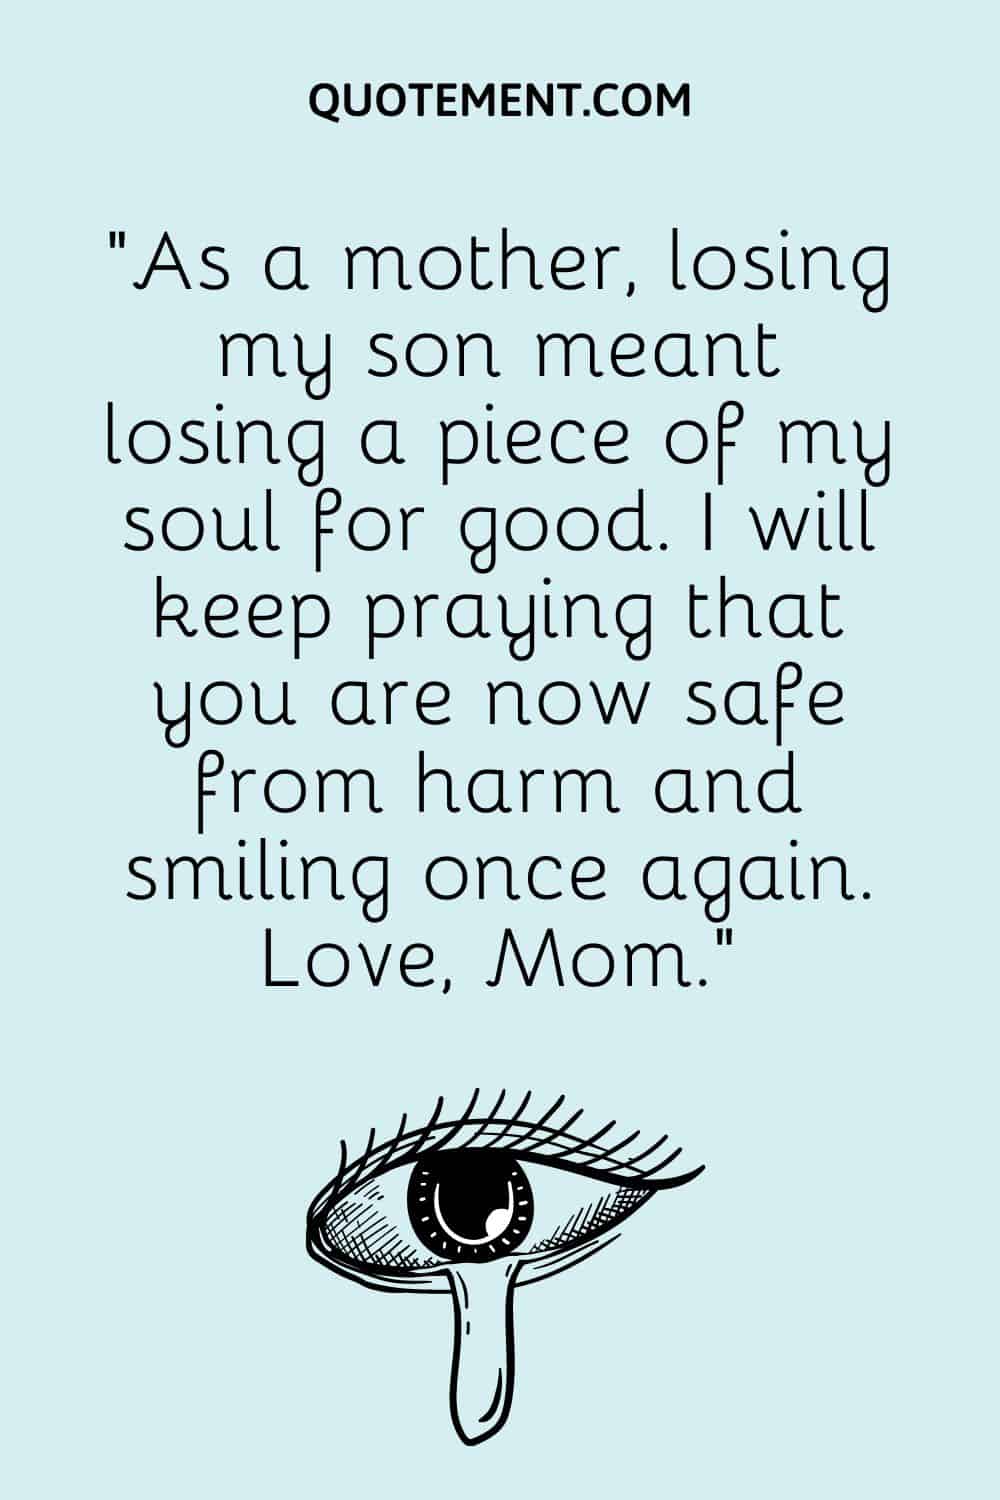 “As a mother, losing my son meant losing a piece of my soul for good. I will keep praying that you are now safe from harm and smiling once again. Love, Mom.”